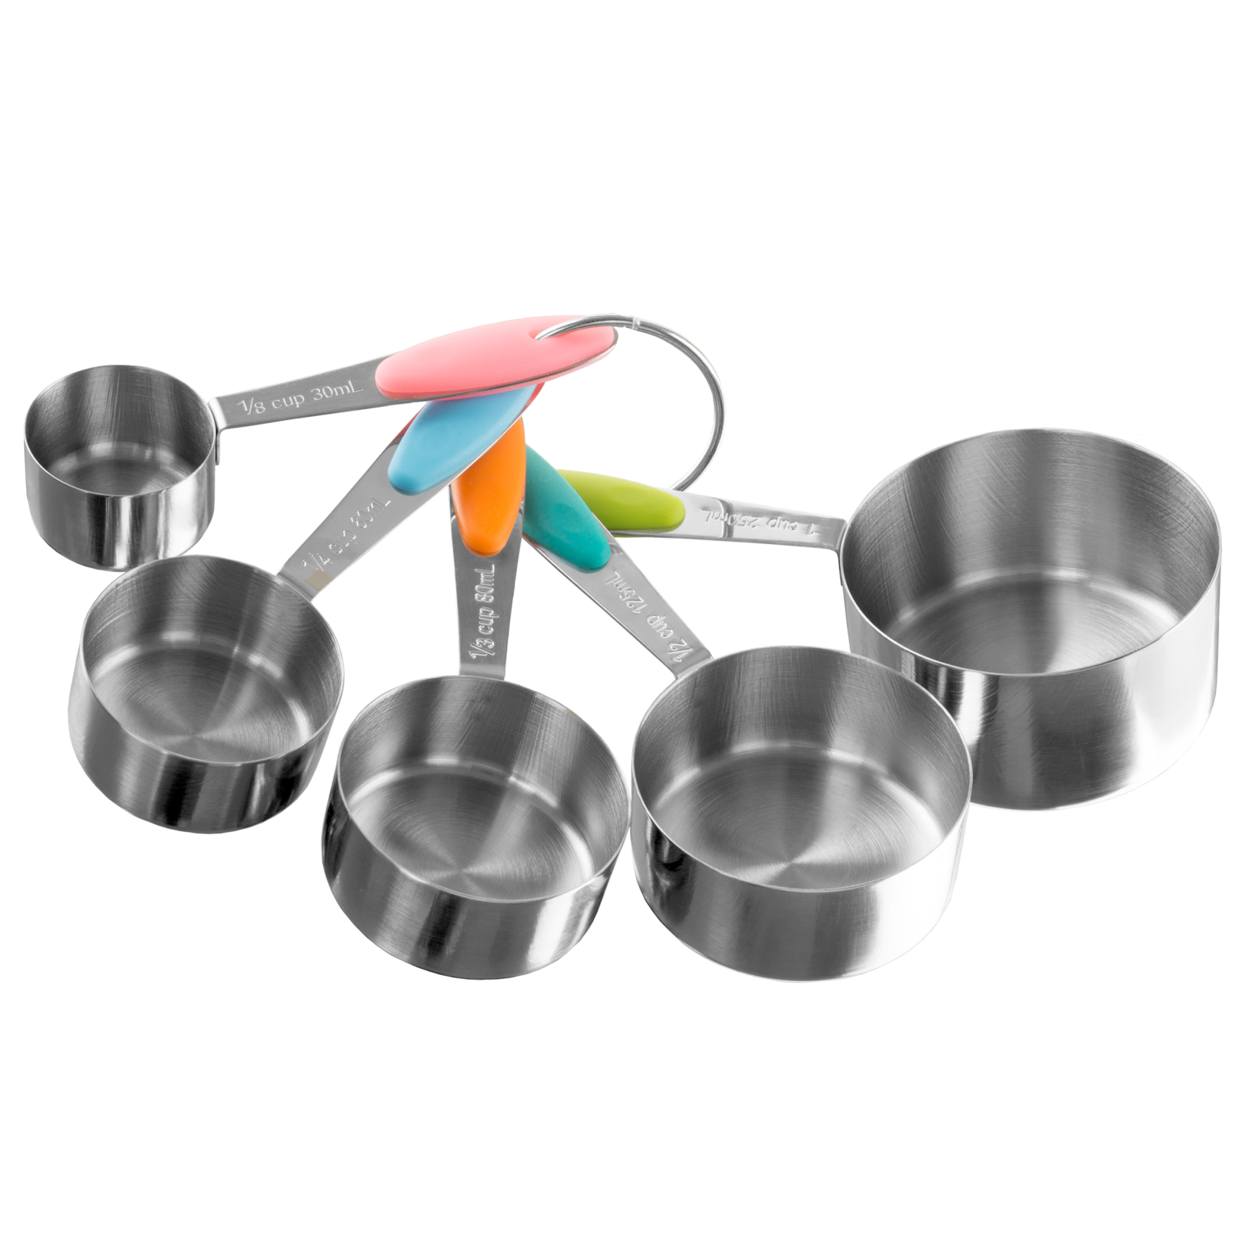 Stainless Steel Measuring Cups Set Of 5 On Ring Space Saving Stacks Inside Cups And Metric Measurements